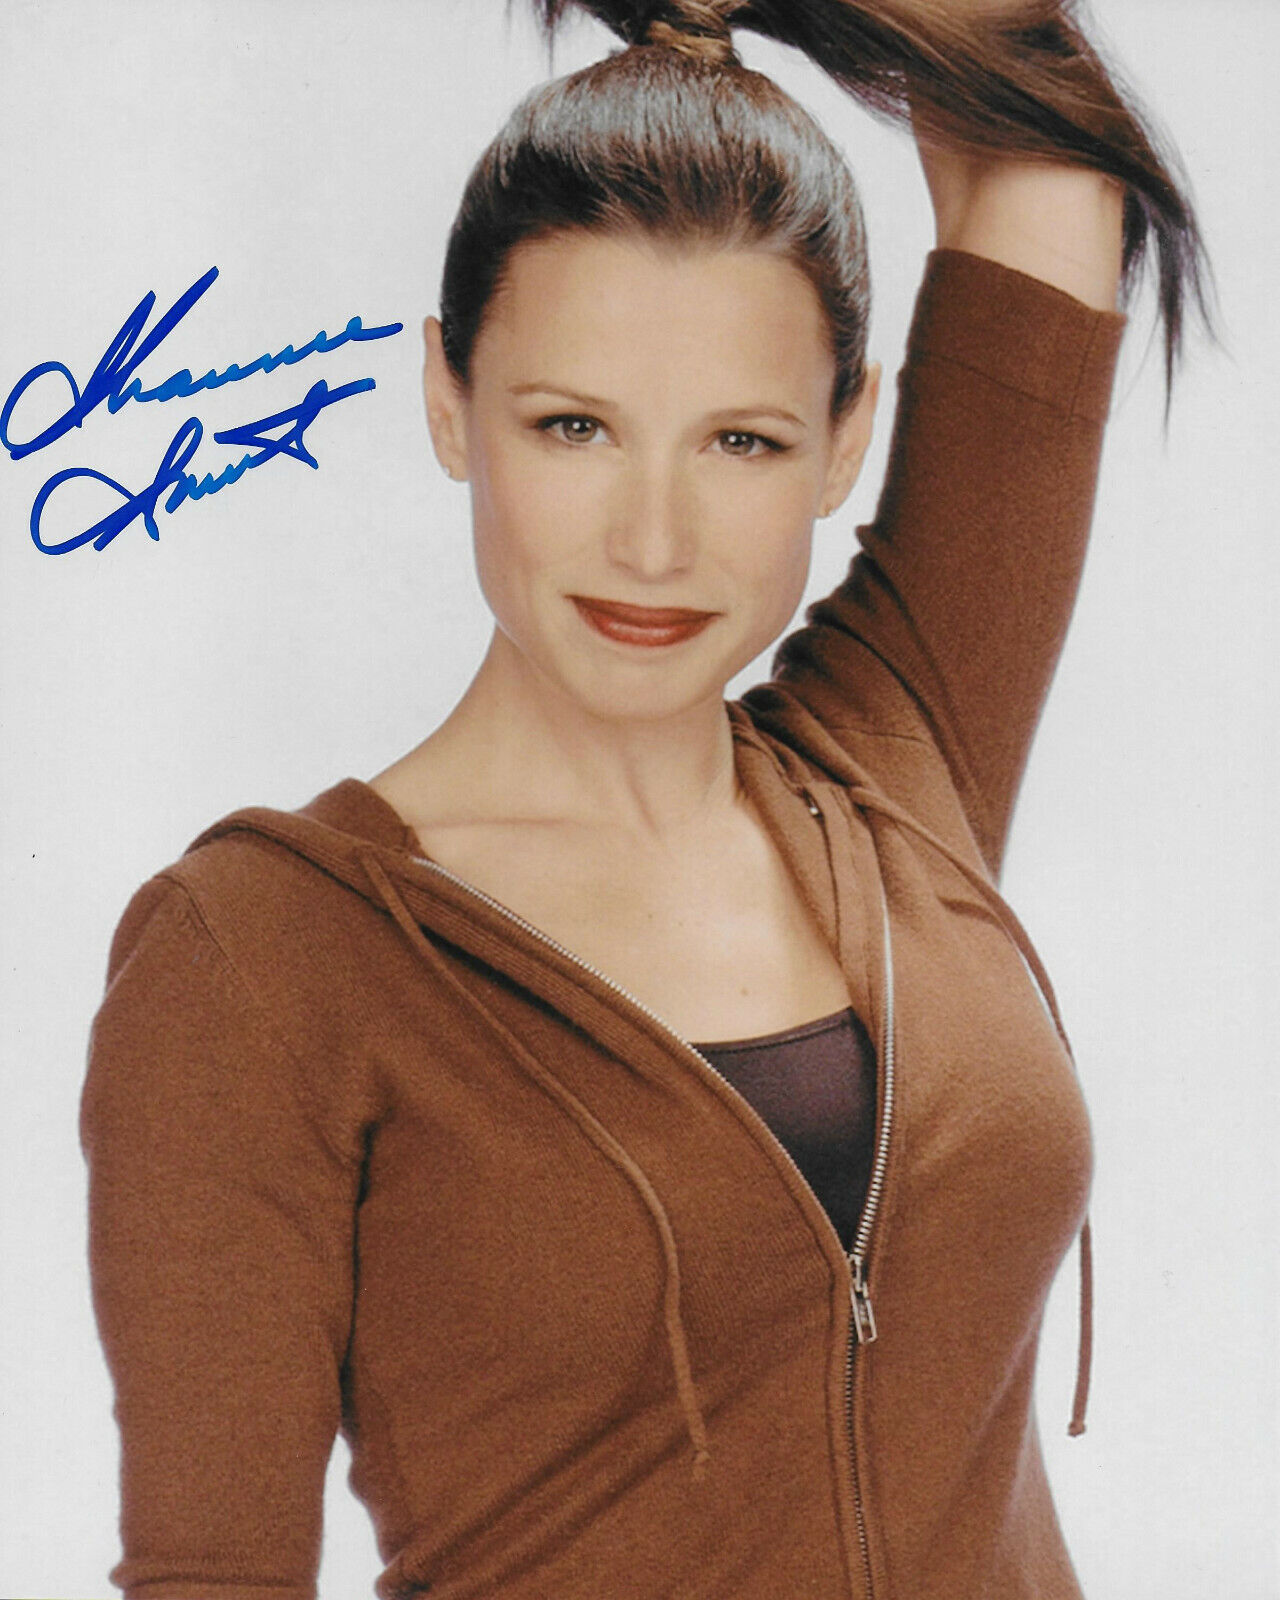 Shawnee Smith Original Autographed 8X10 Photo Poster painting #2